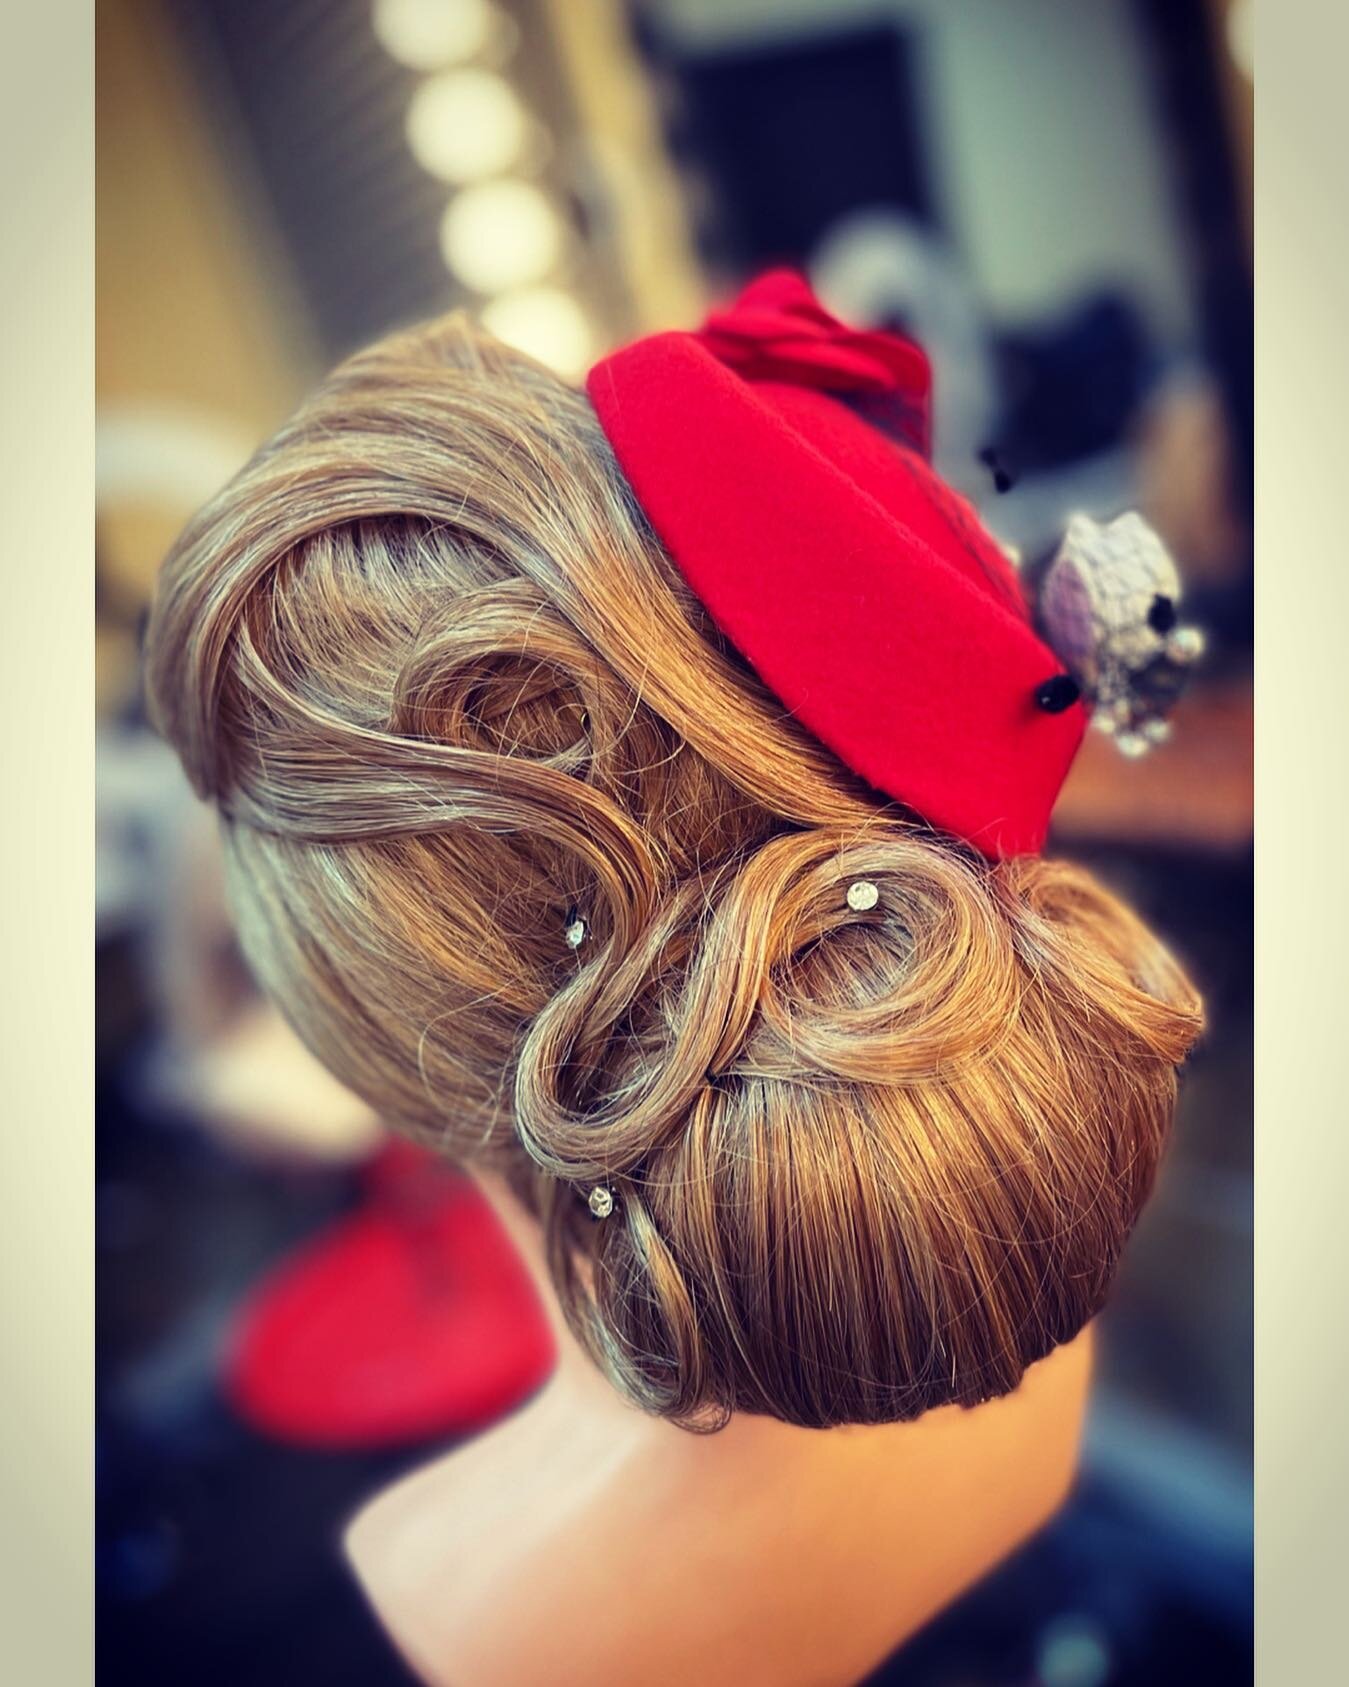 Cynthia Goes Retro Part II 💋💋
I&rsquo;m so proud to say that finished my bridal hairstyling classes and am now certified!  Hairstyling will always be a work in progress for me, but I&rsquo;m getting there! Biggest thank you to @prettylilrenee for t